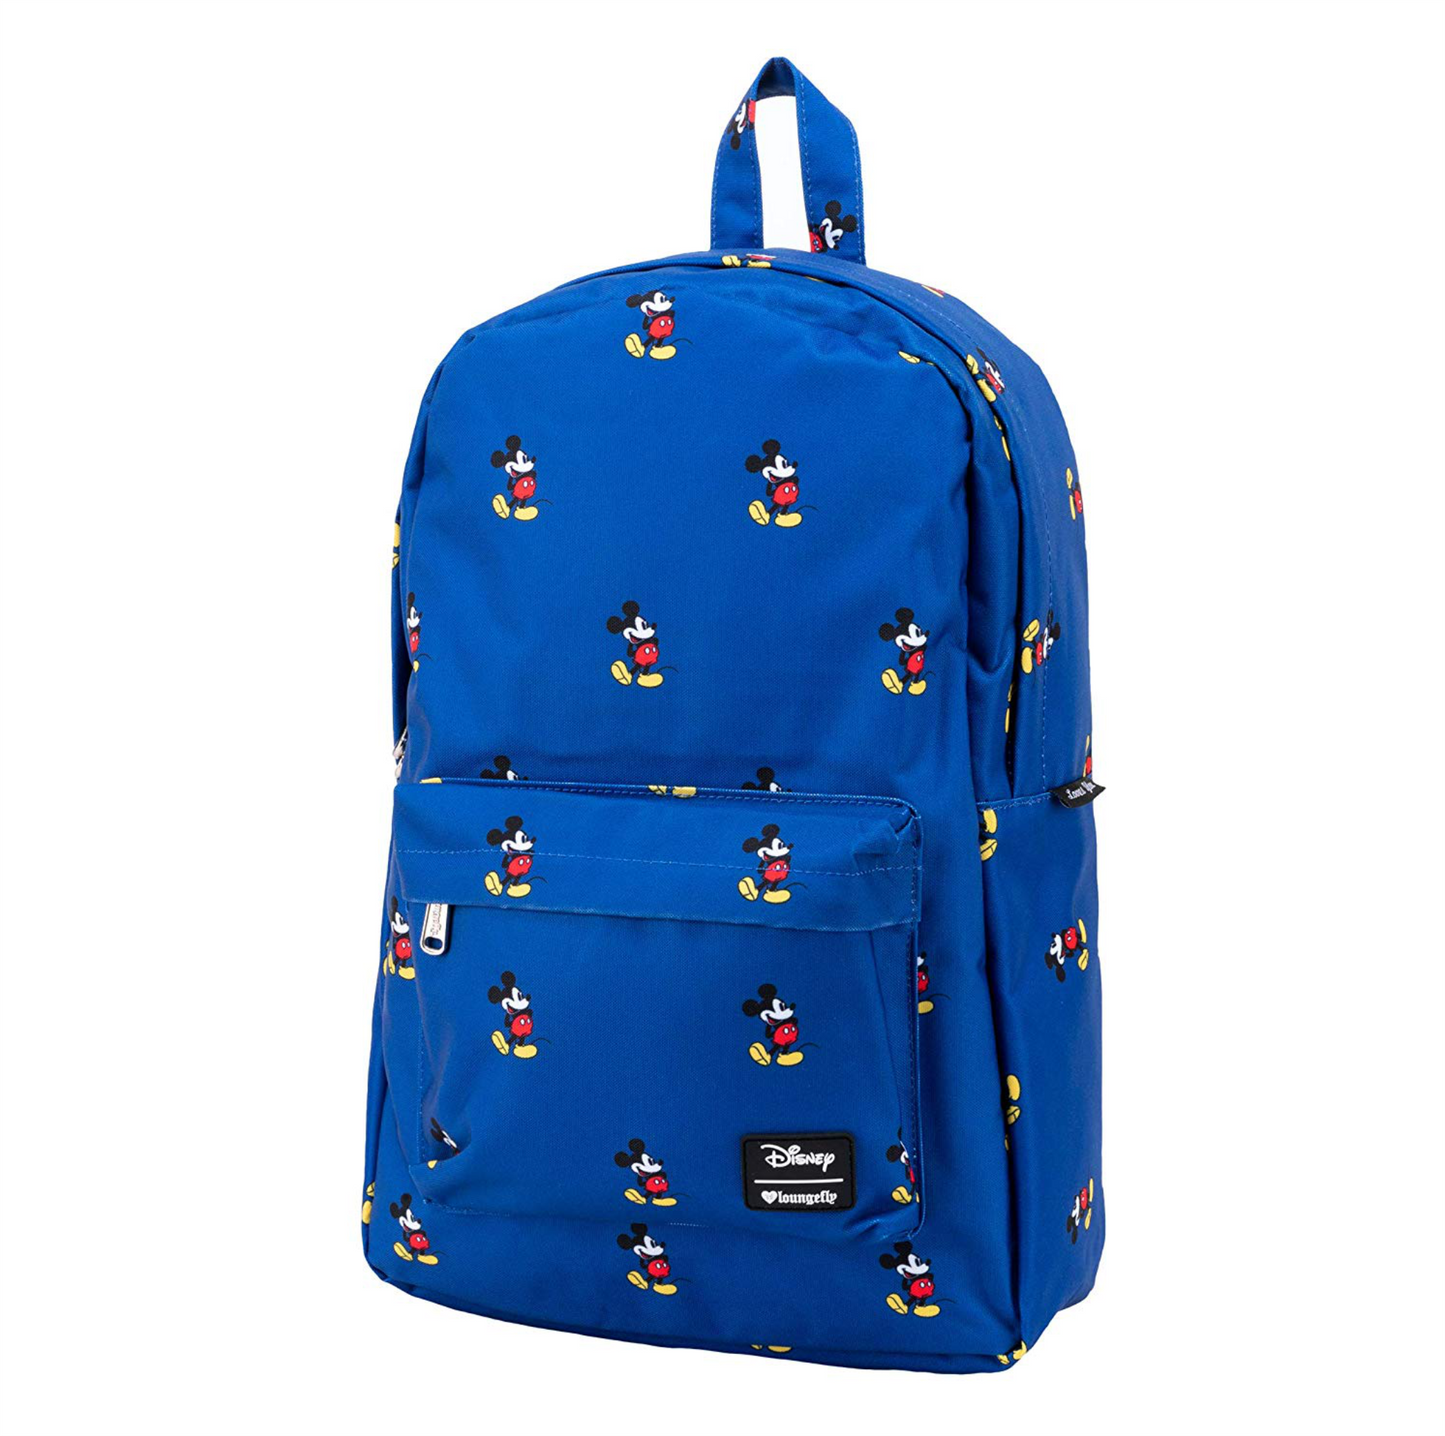 Loungefly X Disney Mickey Mouse Print Blue Backpack